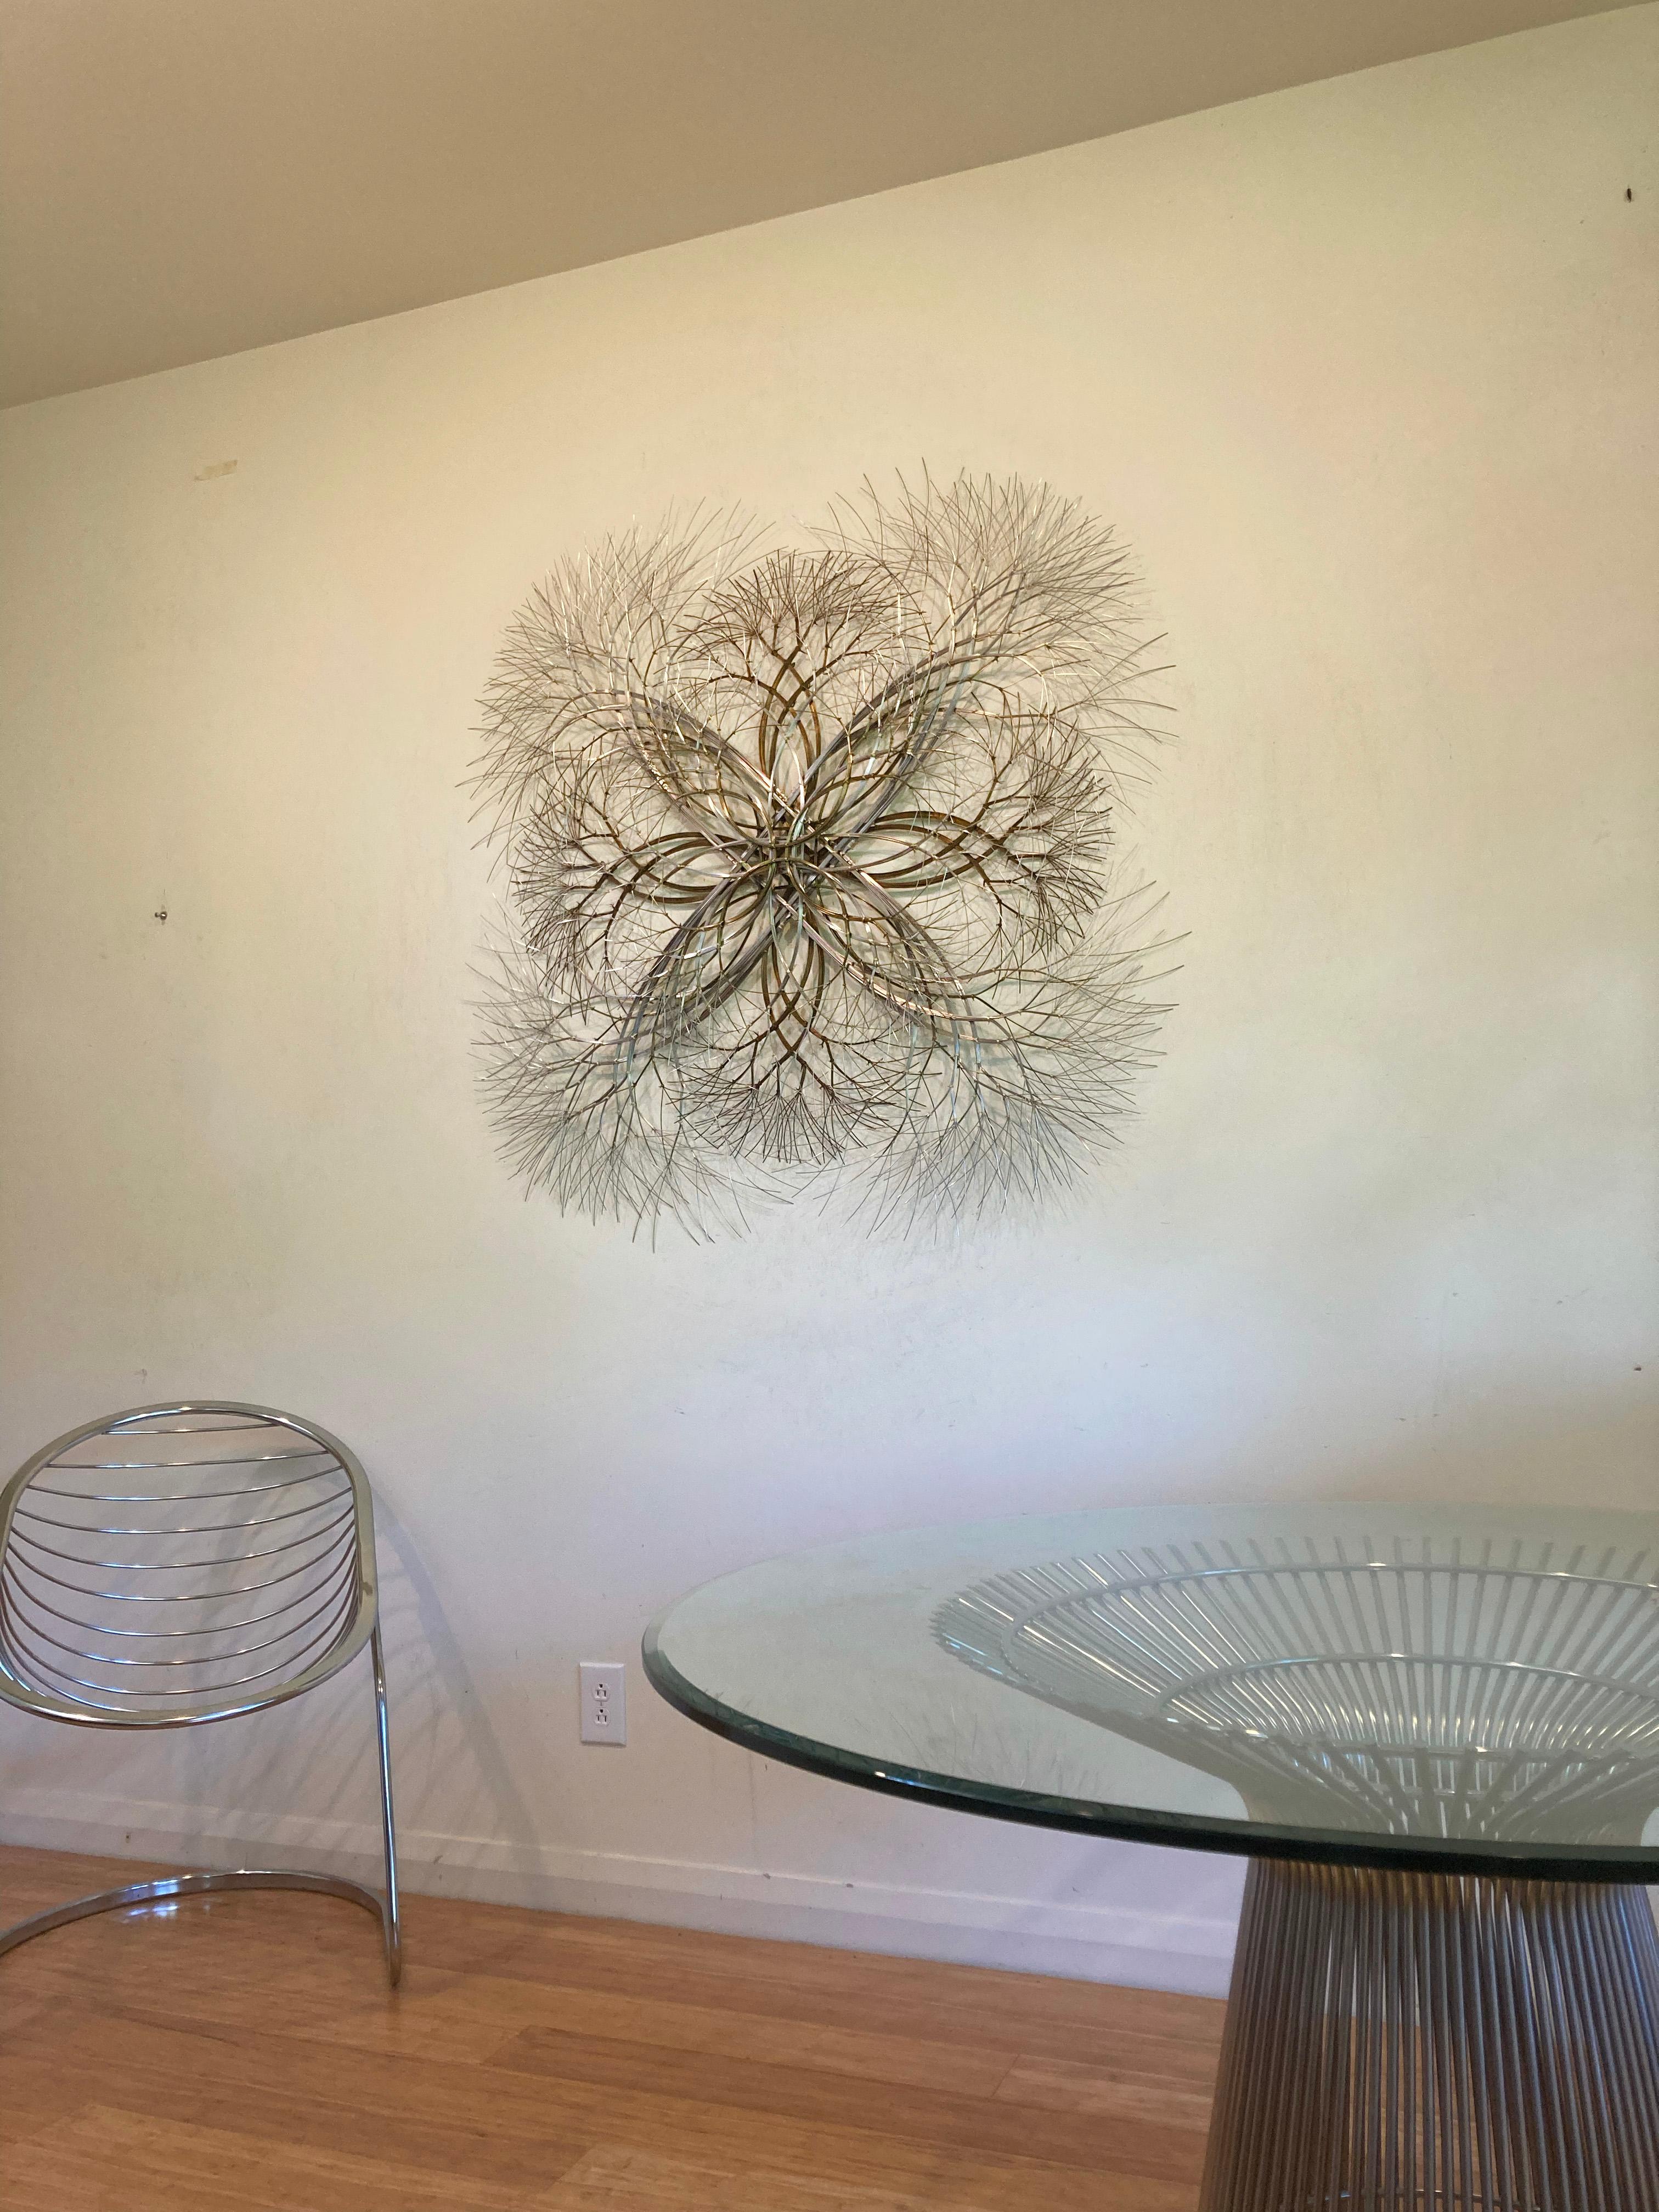 This mirrored geometric sculpture is by Kue King and created using brass and stainless steel wire. Kue uses an aesthetic reminiscent of trees, electricity, and light to create sculptures of peace and beauty. Adults and children alike see snowflakes,